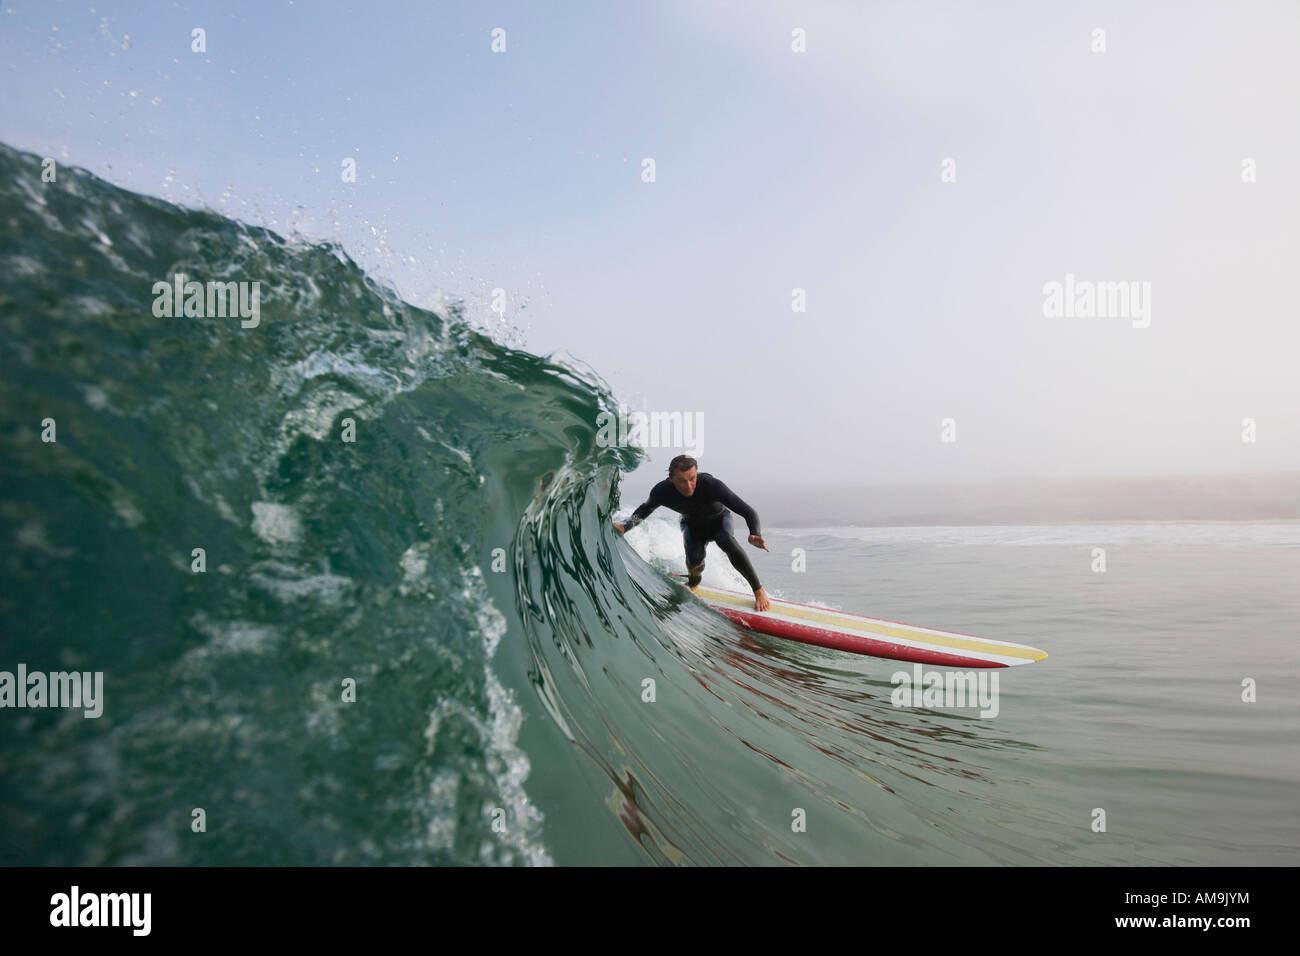 Man surfing a wave. Stock Photo